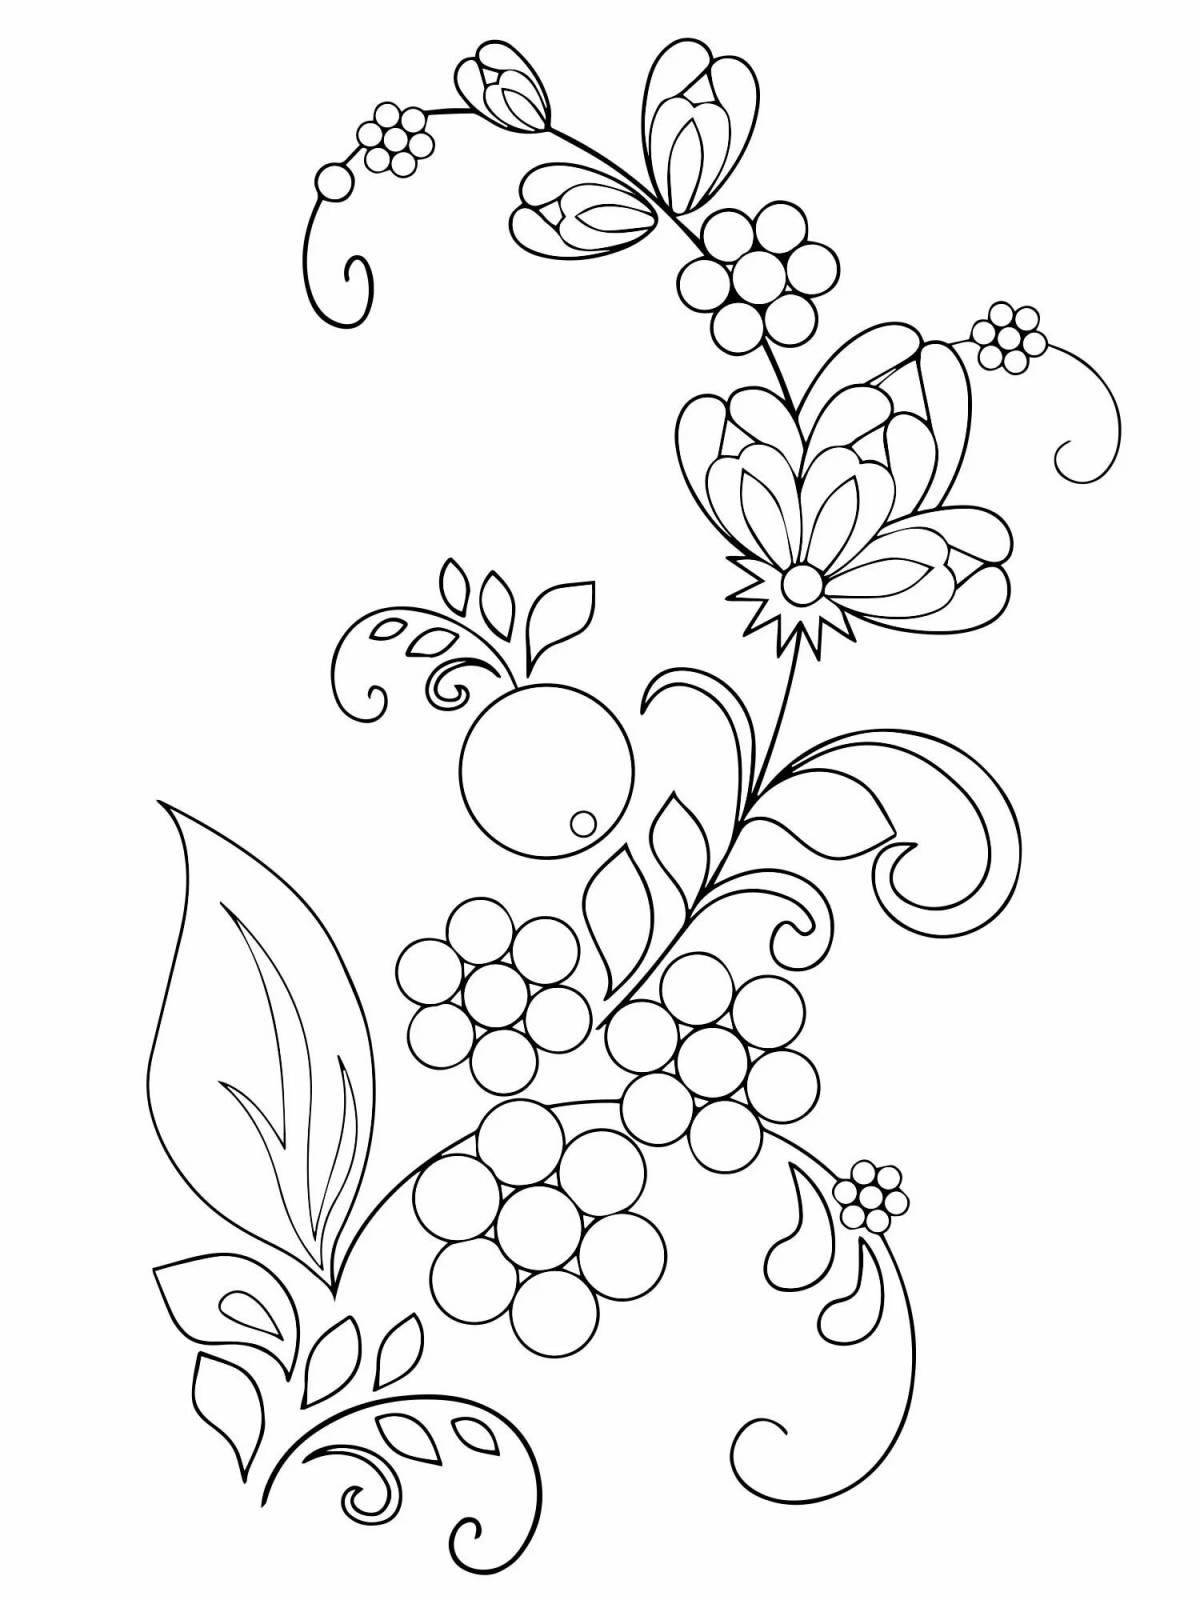 Flower patterns coloring book